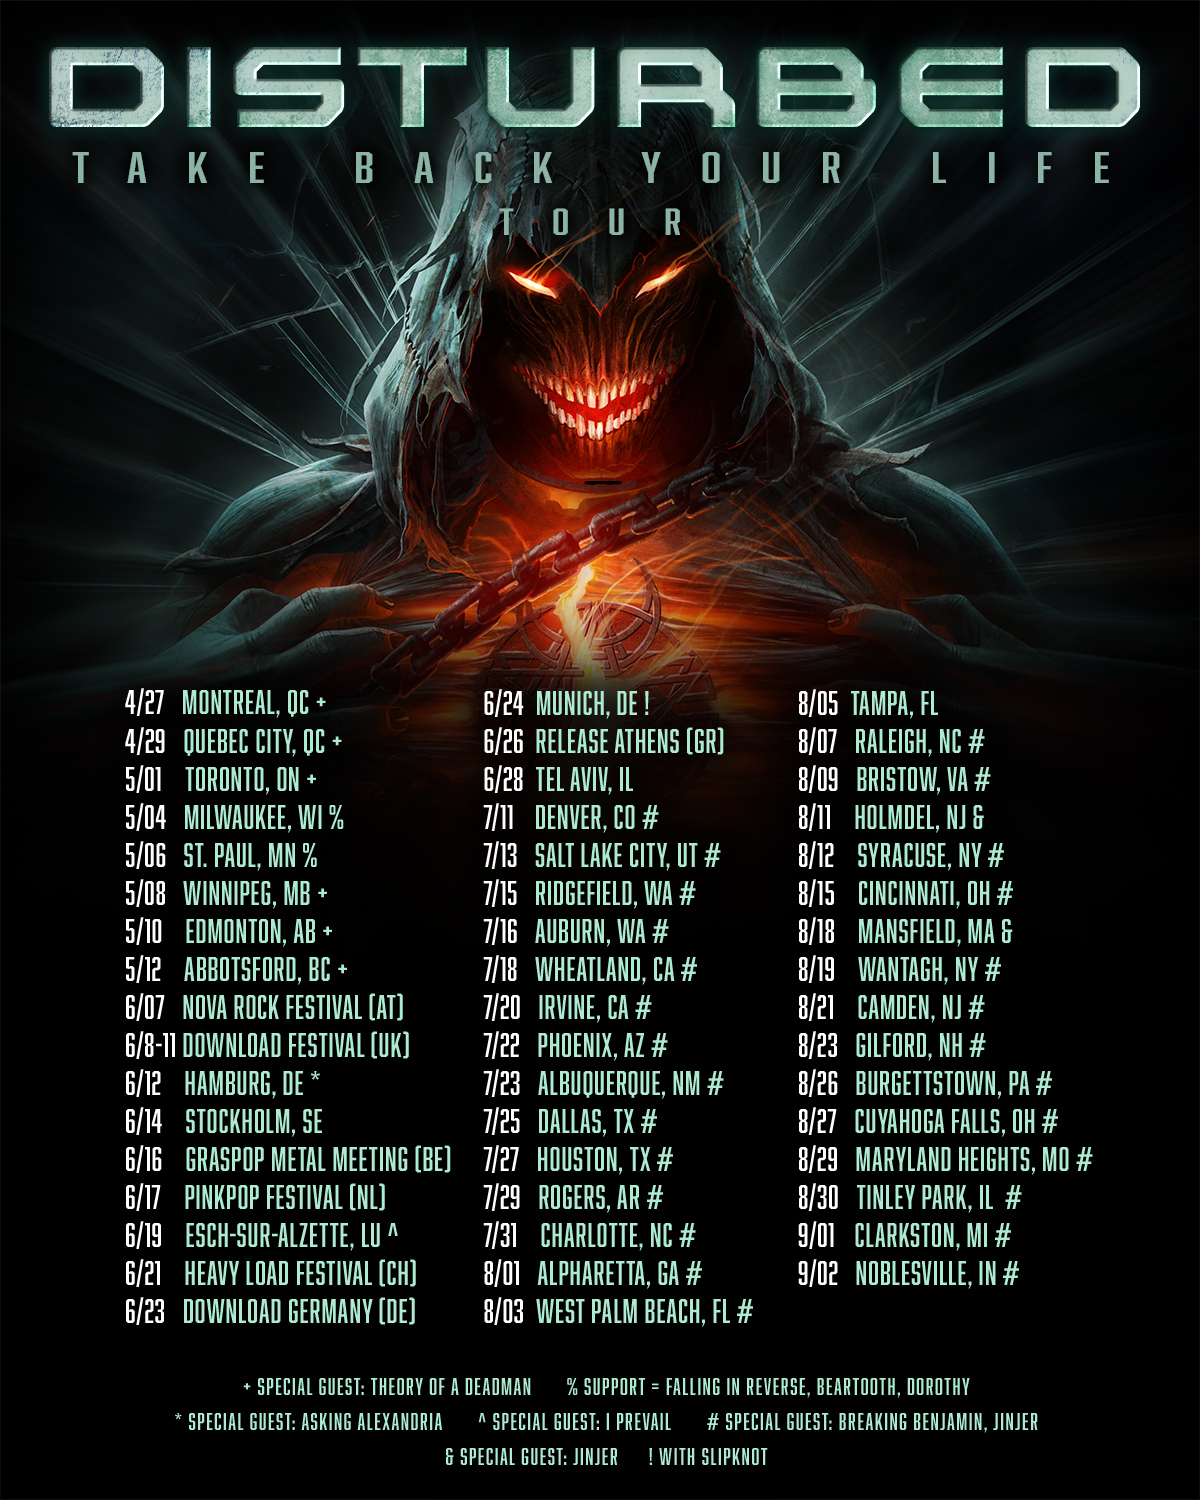 Disturbed's Take Back Your Life World Tour flyer with all dates